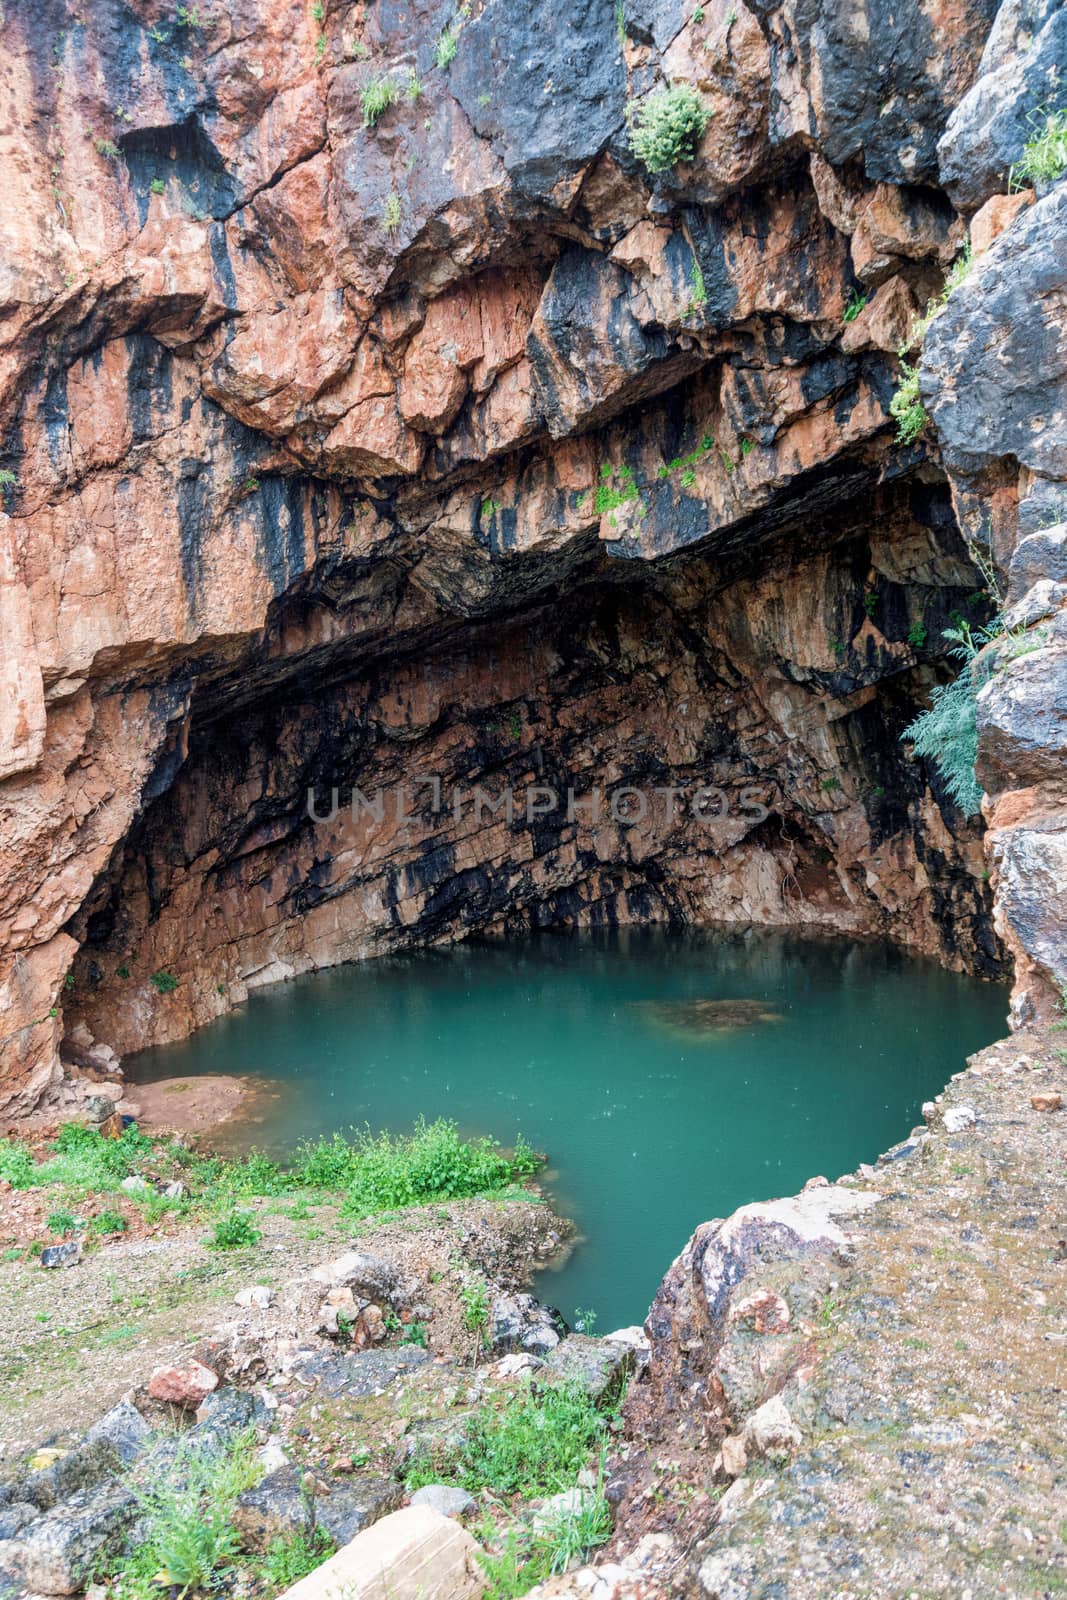 The Grotto of the God Pan in israel by compuinfoto